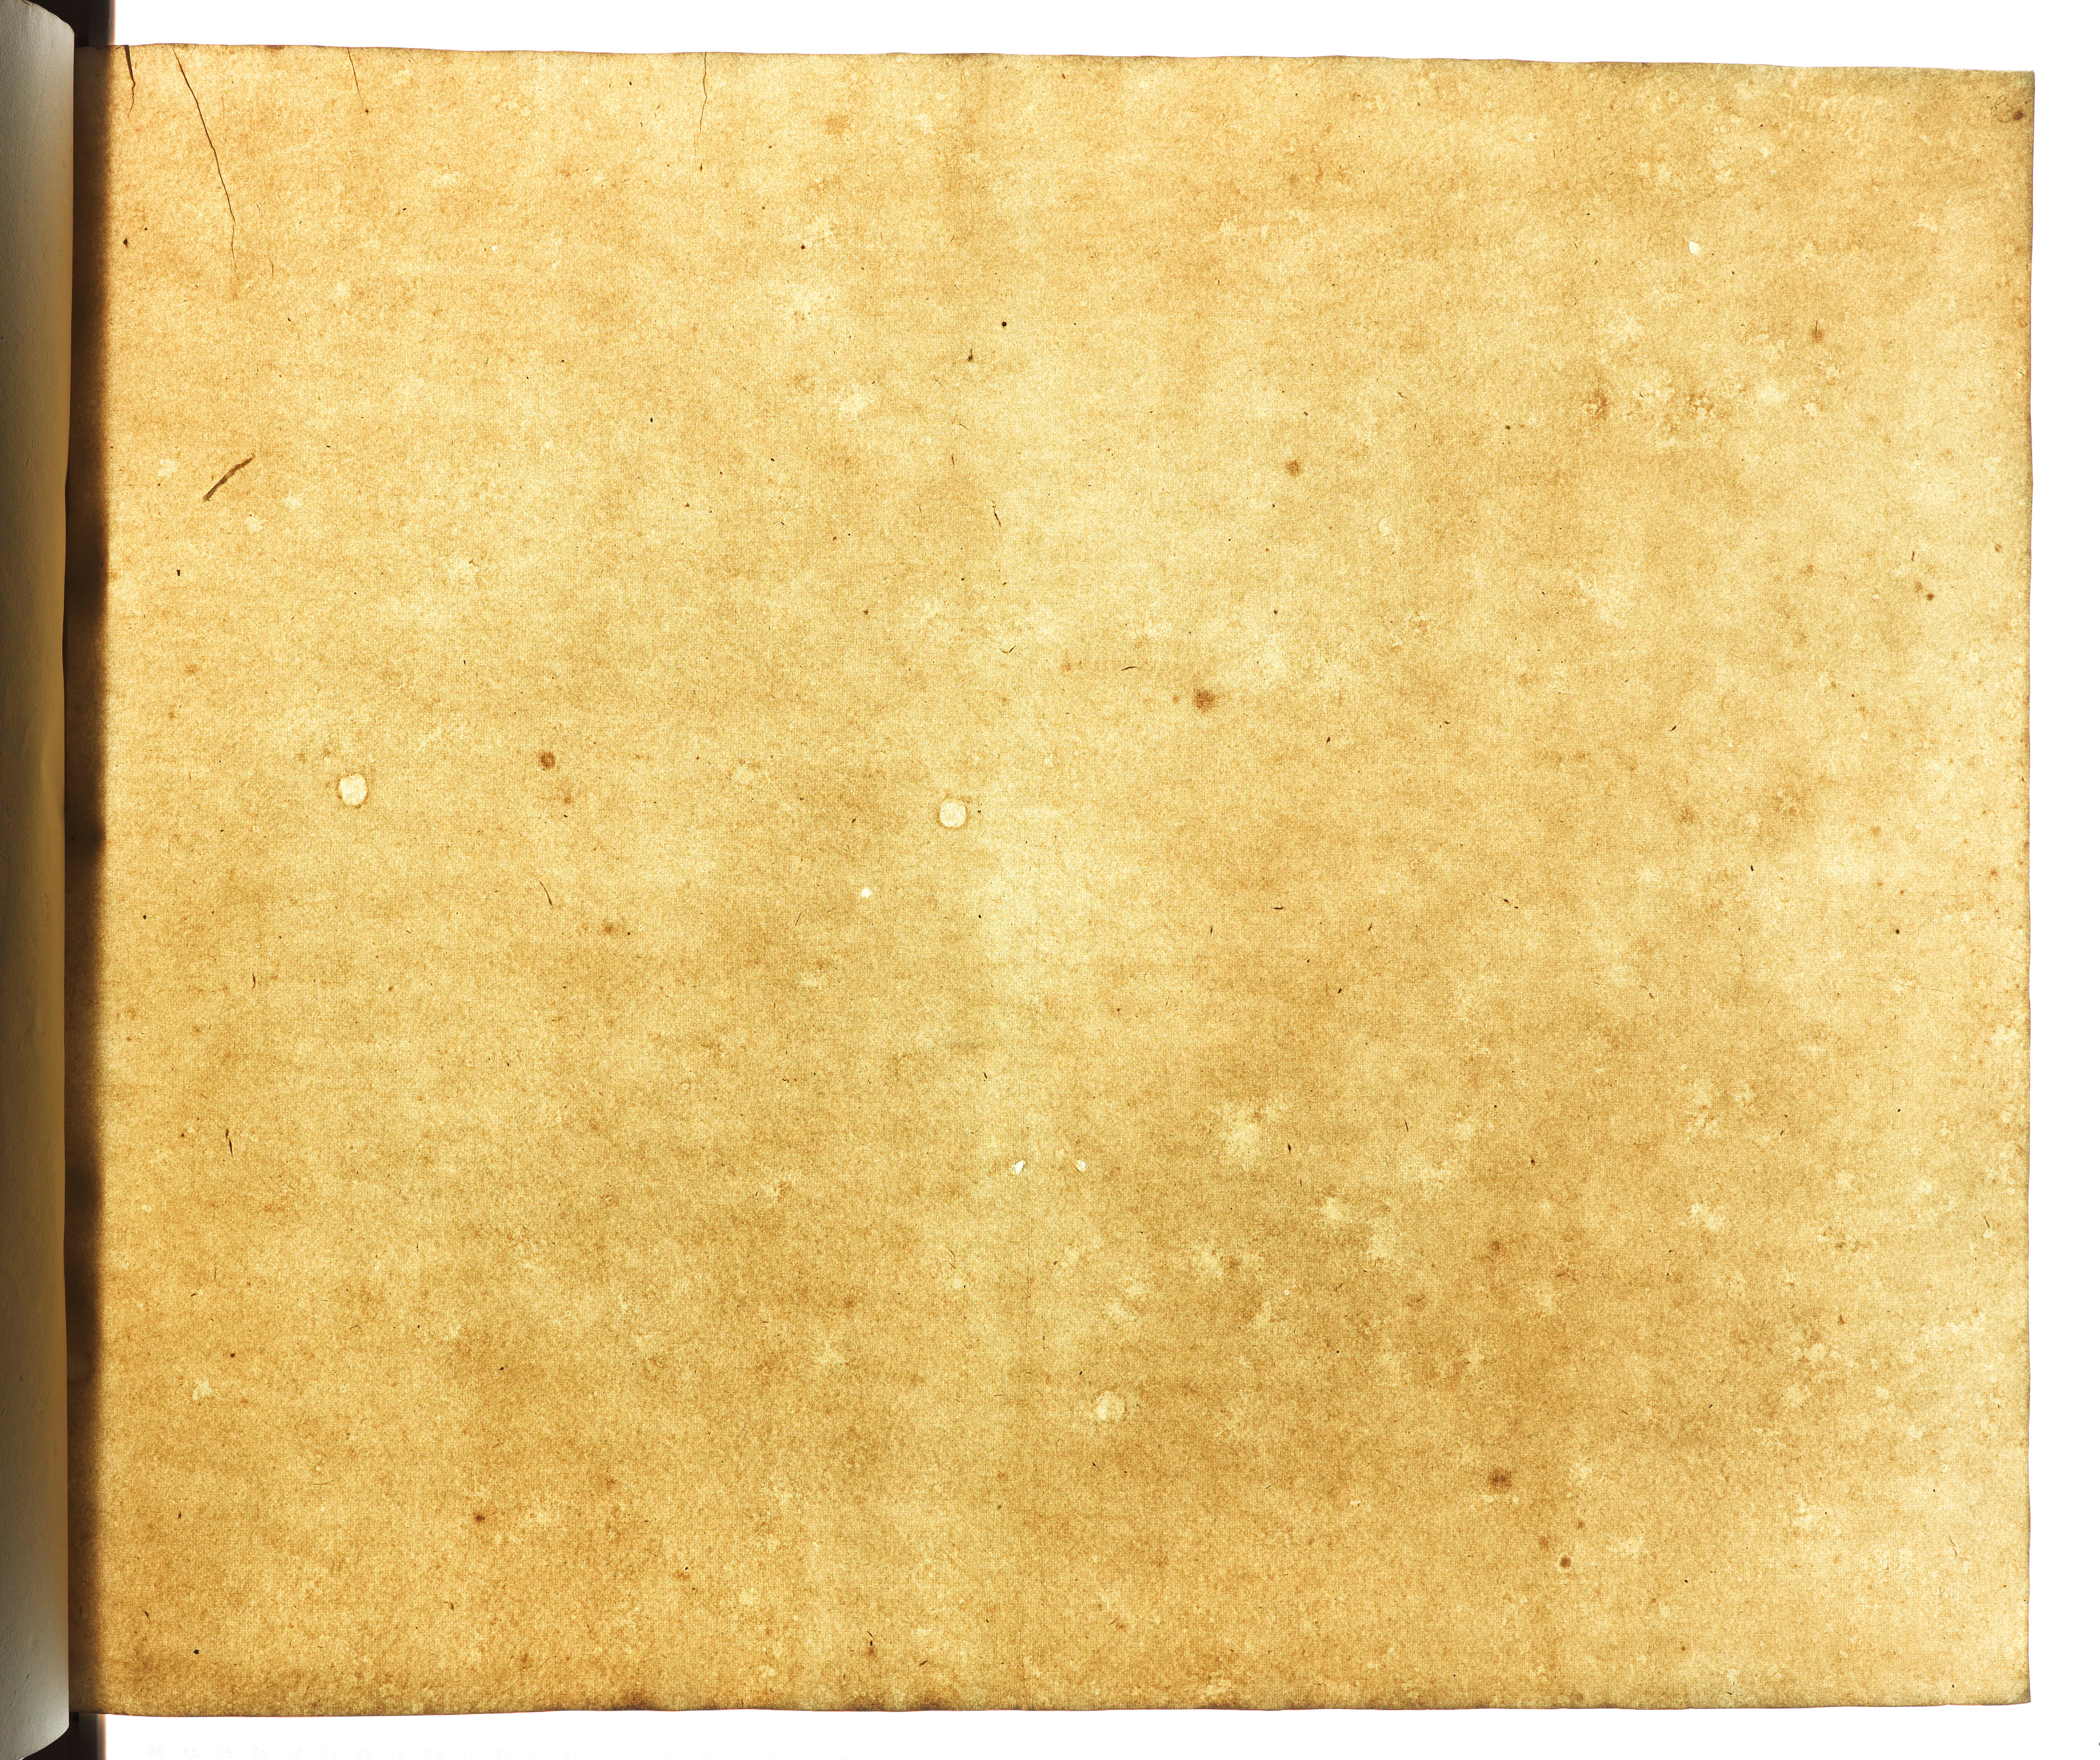 Eighty-third sheet from album 1, transmitted light photograph of the blank sheet